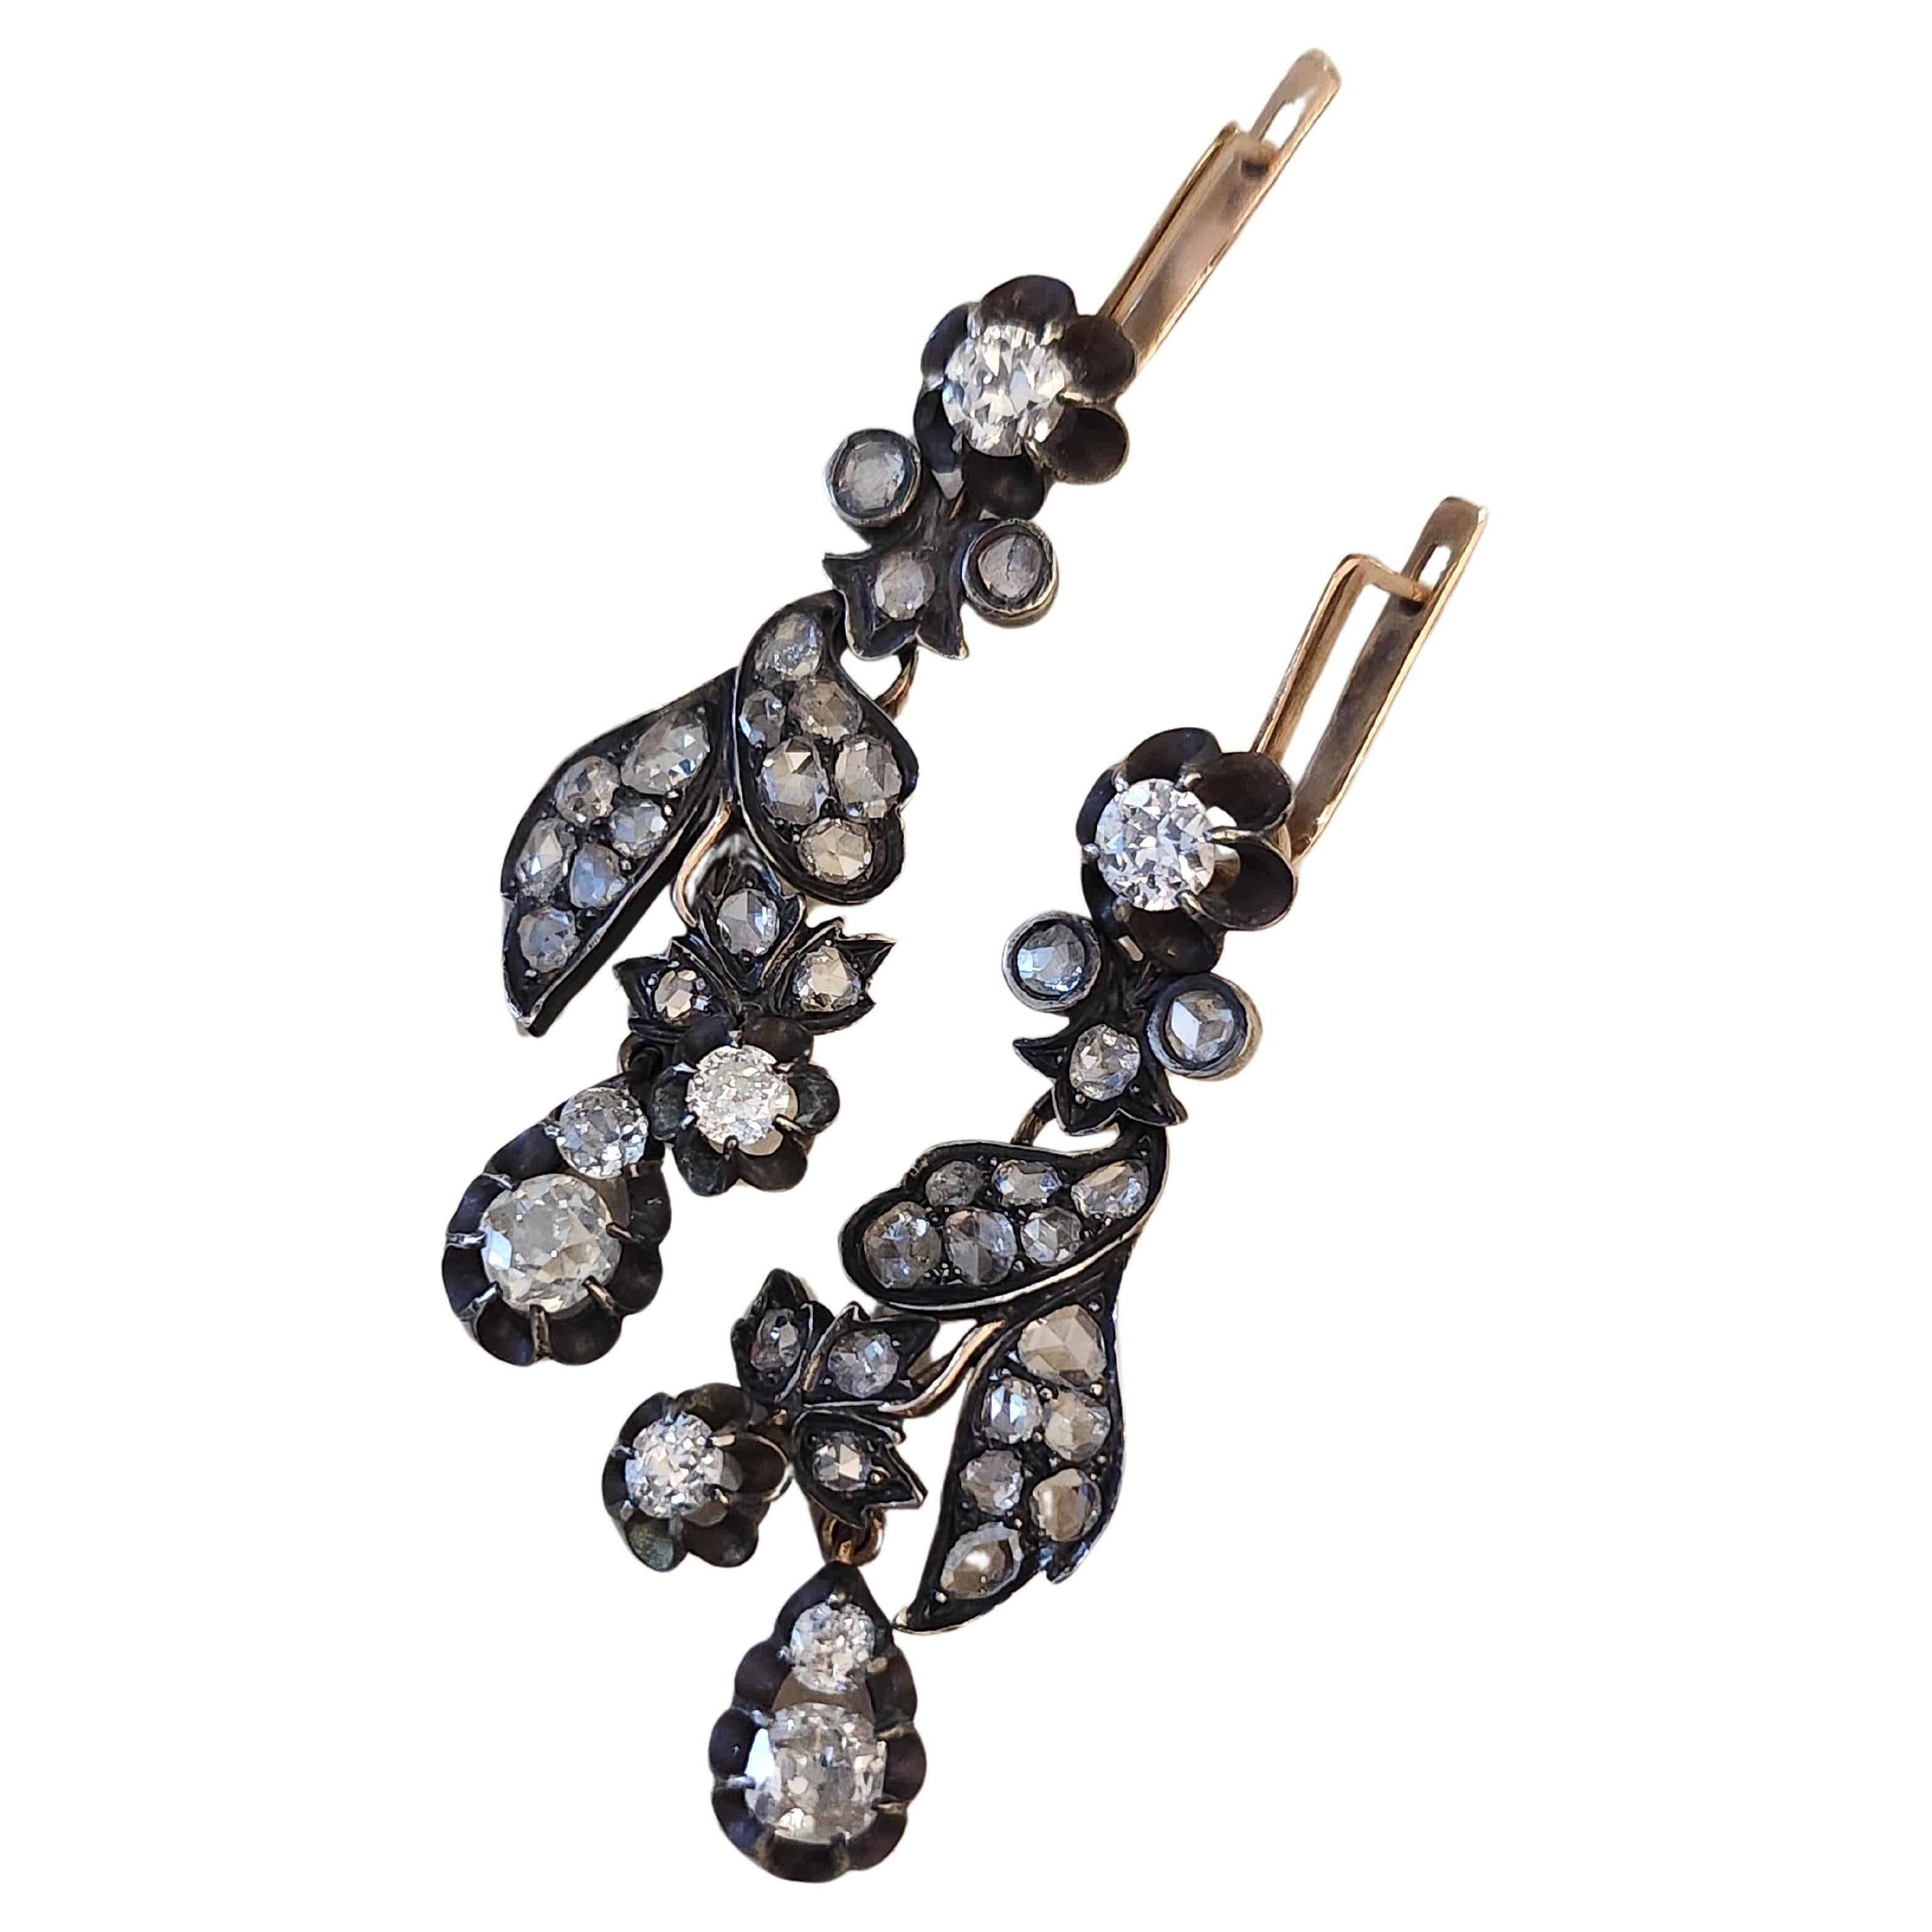 14k gold large earrings in oxdized gold color in leaf designe with old mine cut diamonds and rose cut diamonds estimate weight of 3.5 carats total lenght 7cm 